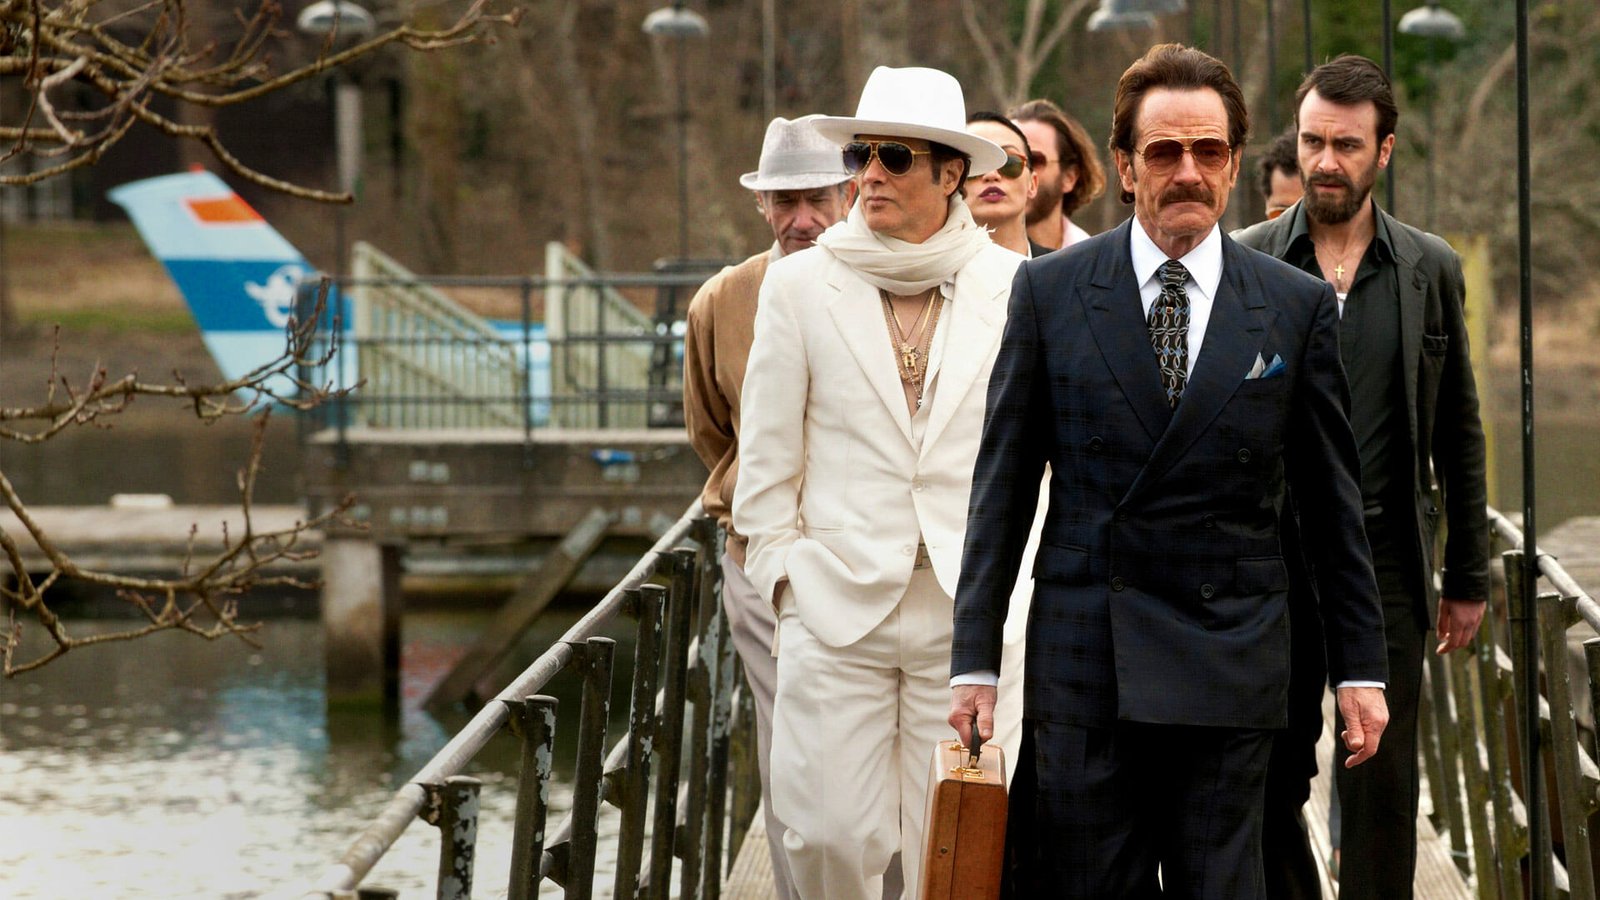 Best crime movies on amazon prime: The Infiltrator